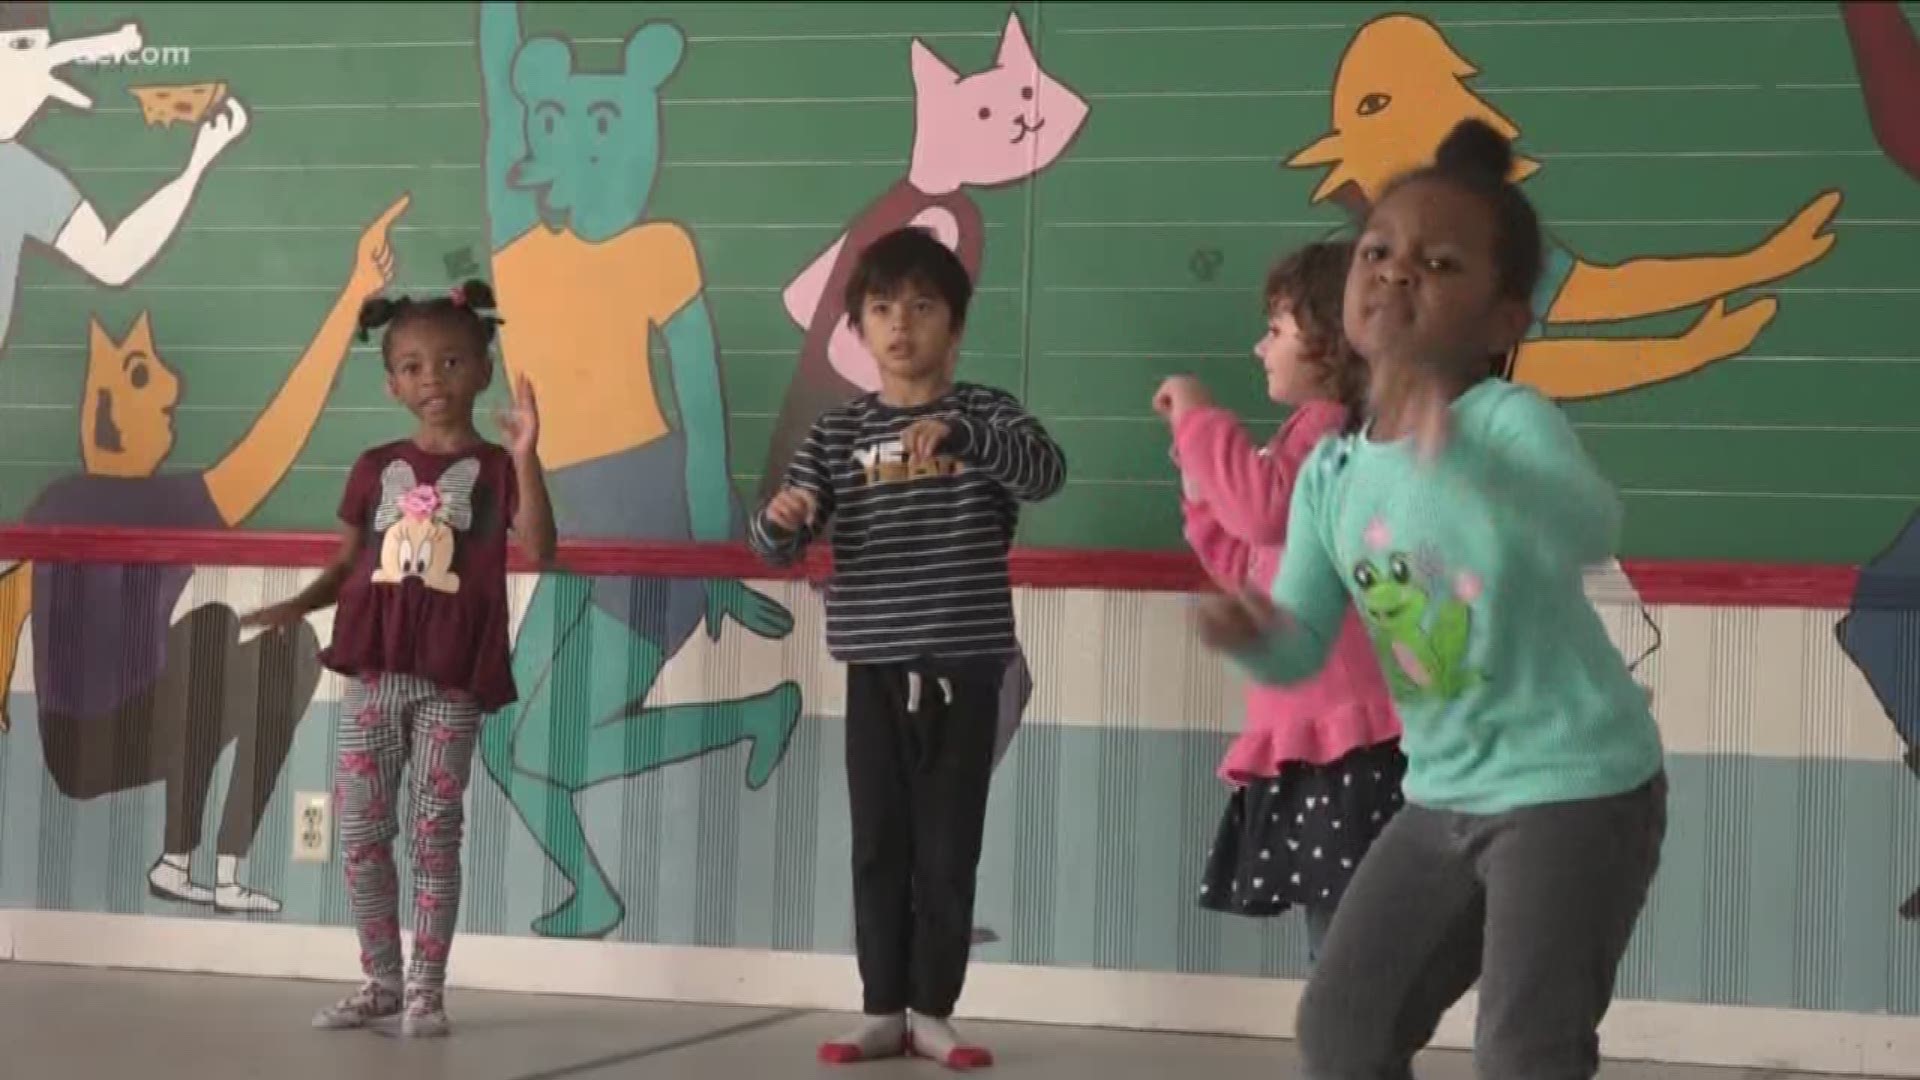 For one elementary class in East Austin, students get to learn English by dancing.